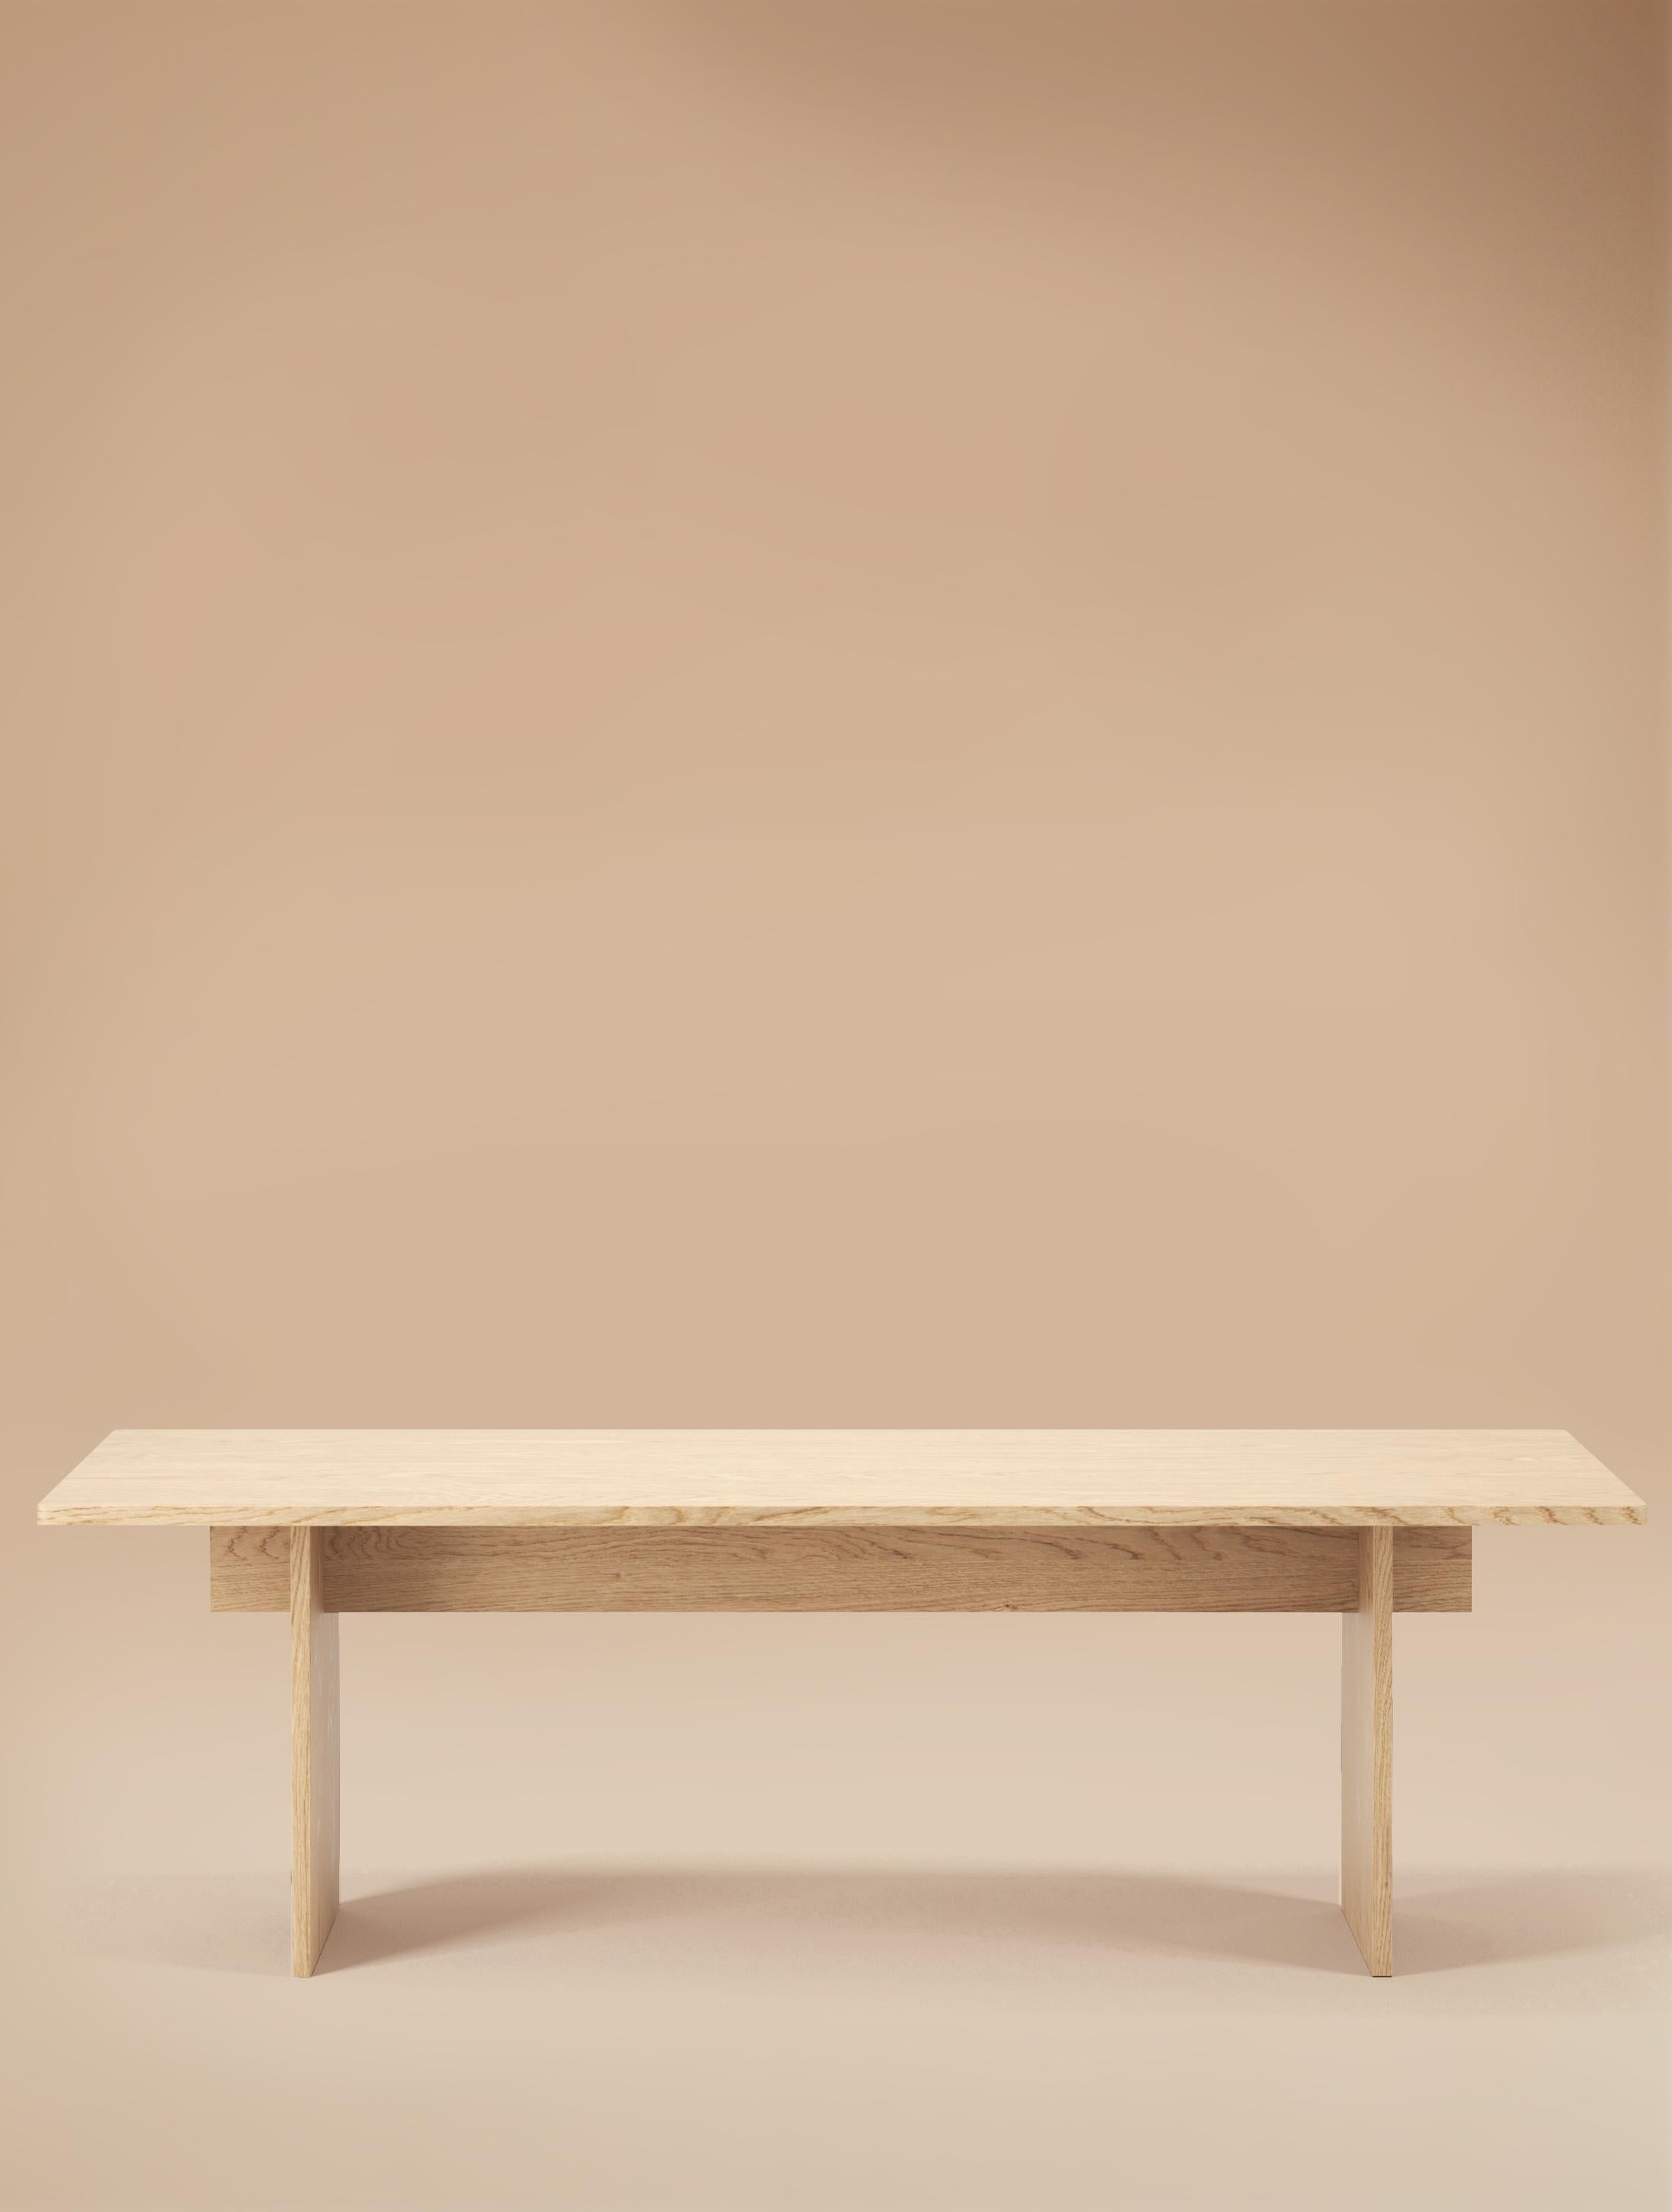 8 Seater  Faure Table Handcrafted in Walnut by Kevin Frankental for Lemon  11